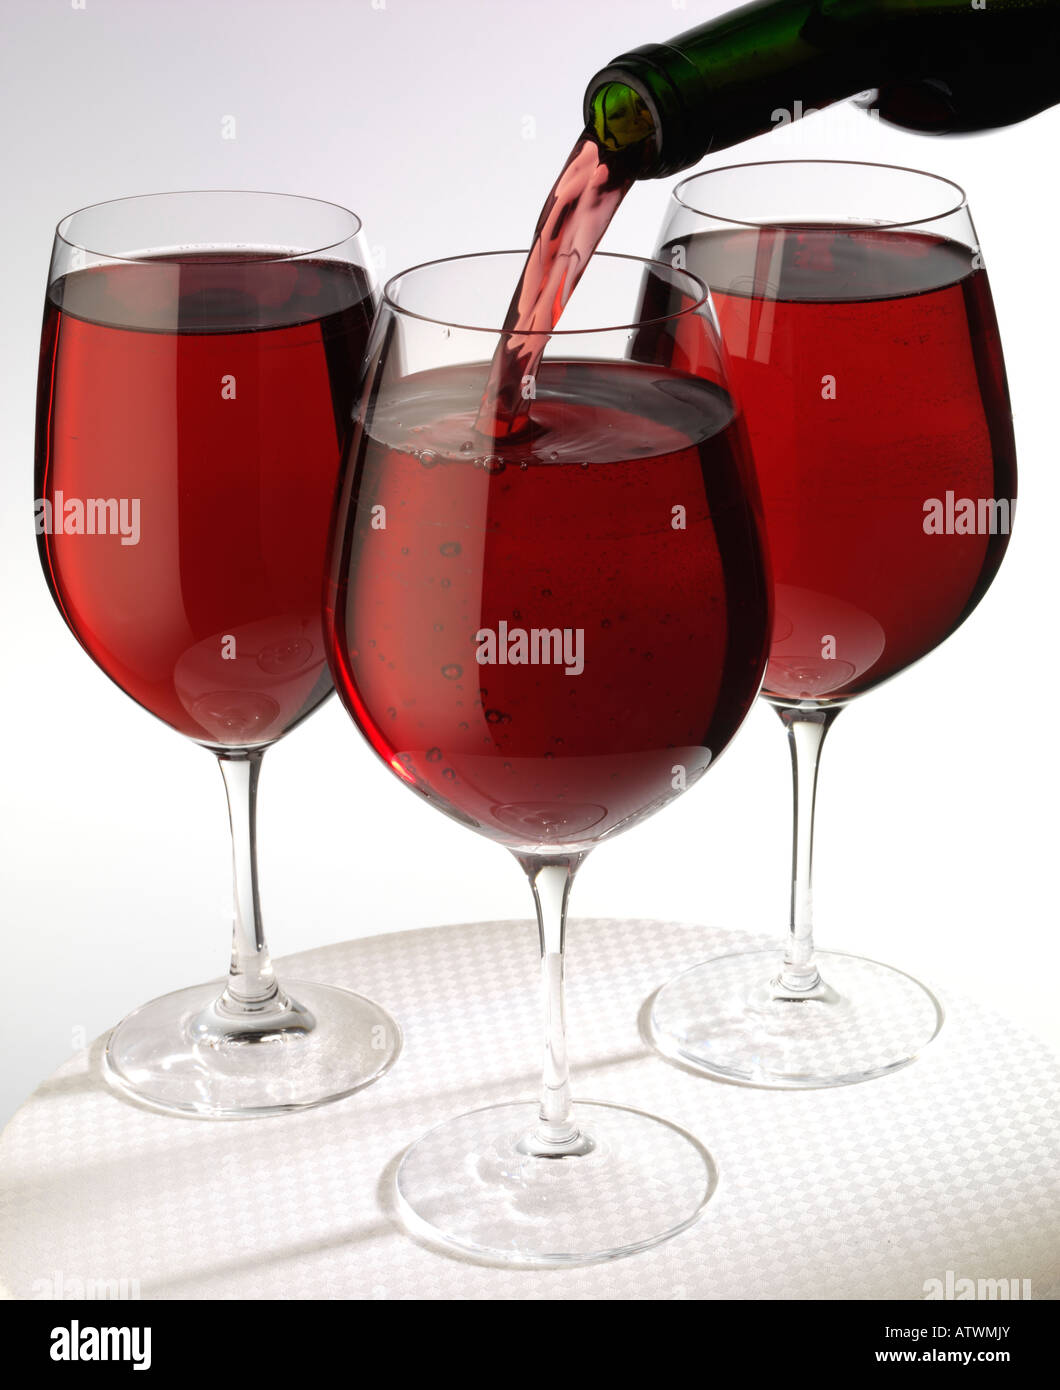 POURING RED WINE INTO THREE GLASSES Stock Photo